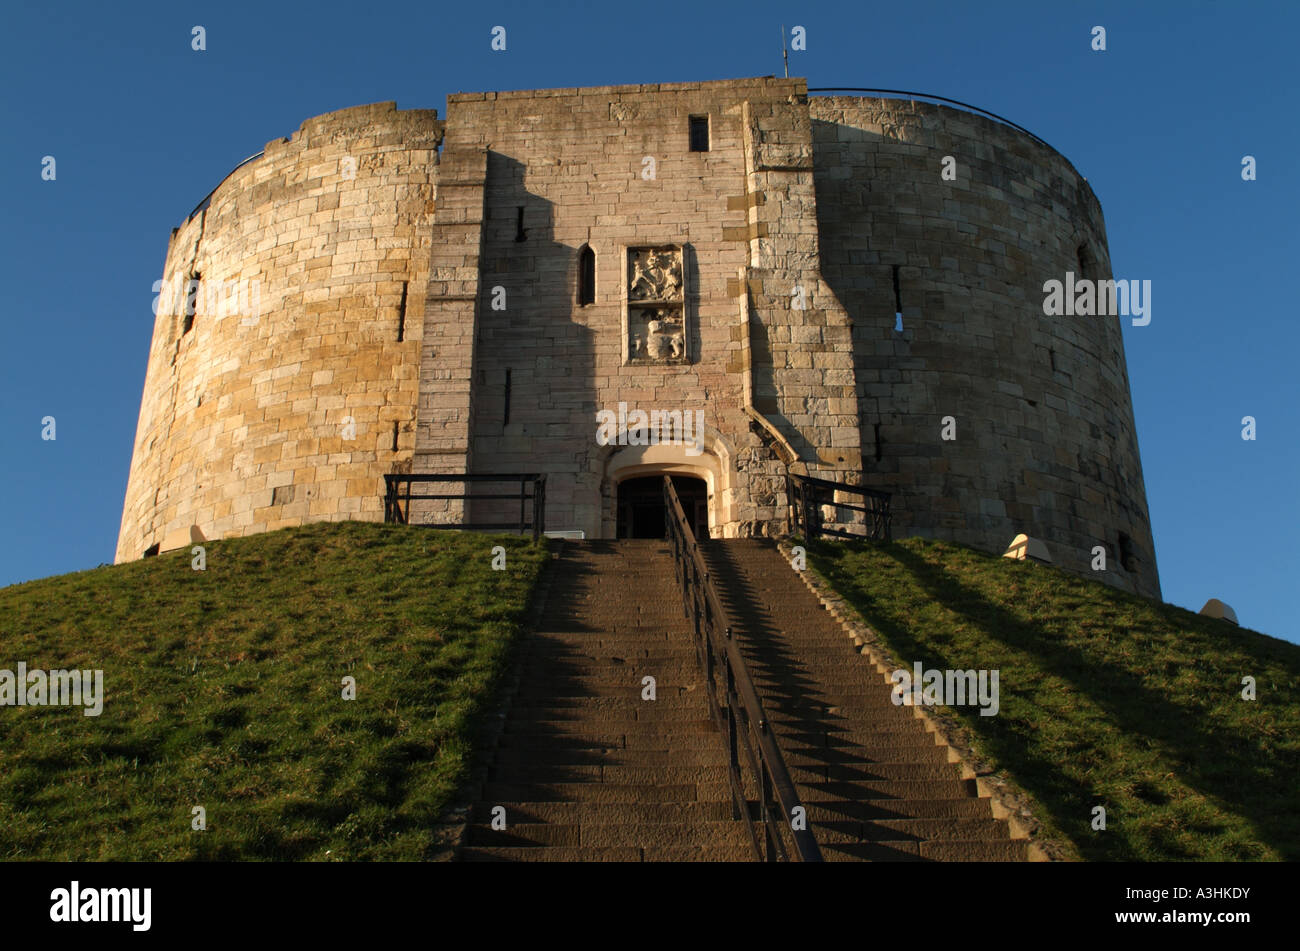 The steps leading to the entrance of Clifford's Tower, York. Stock Photo